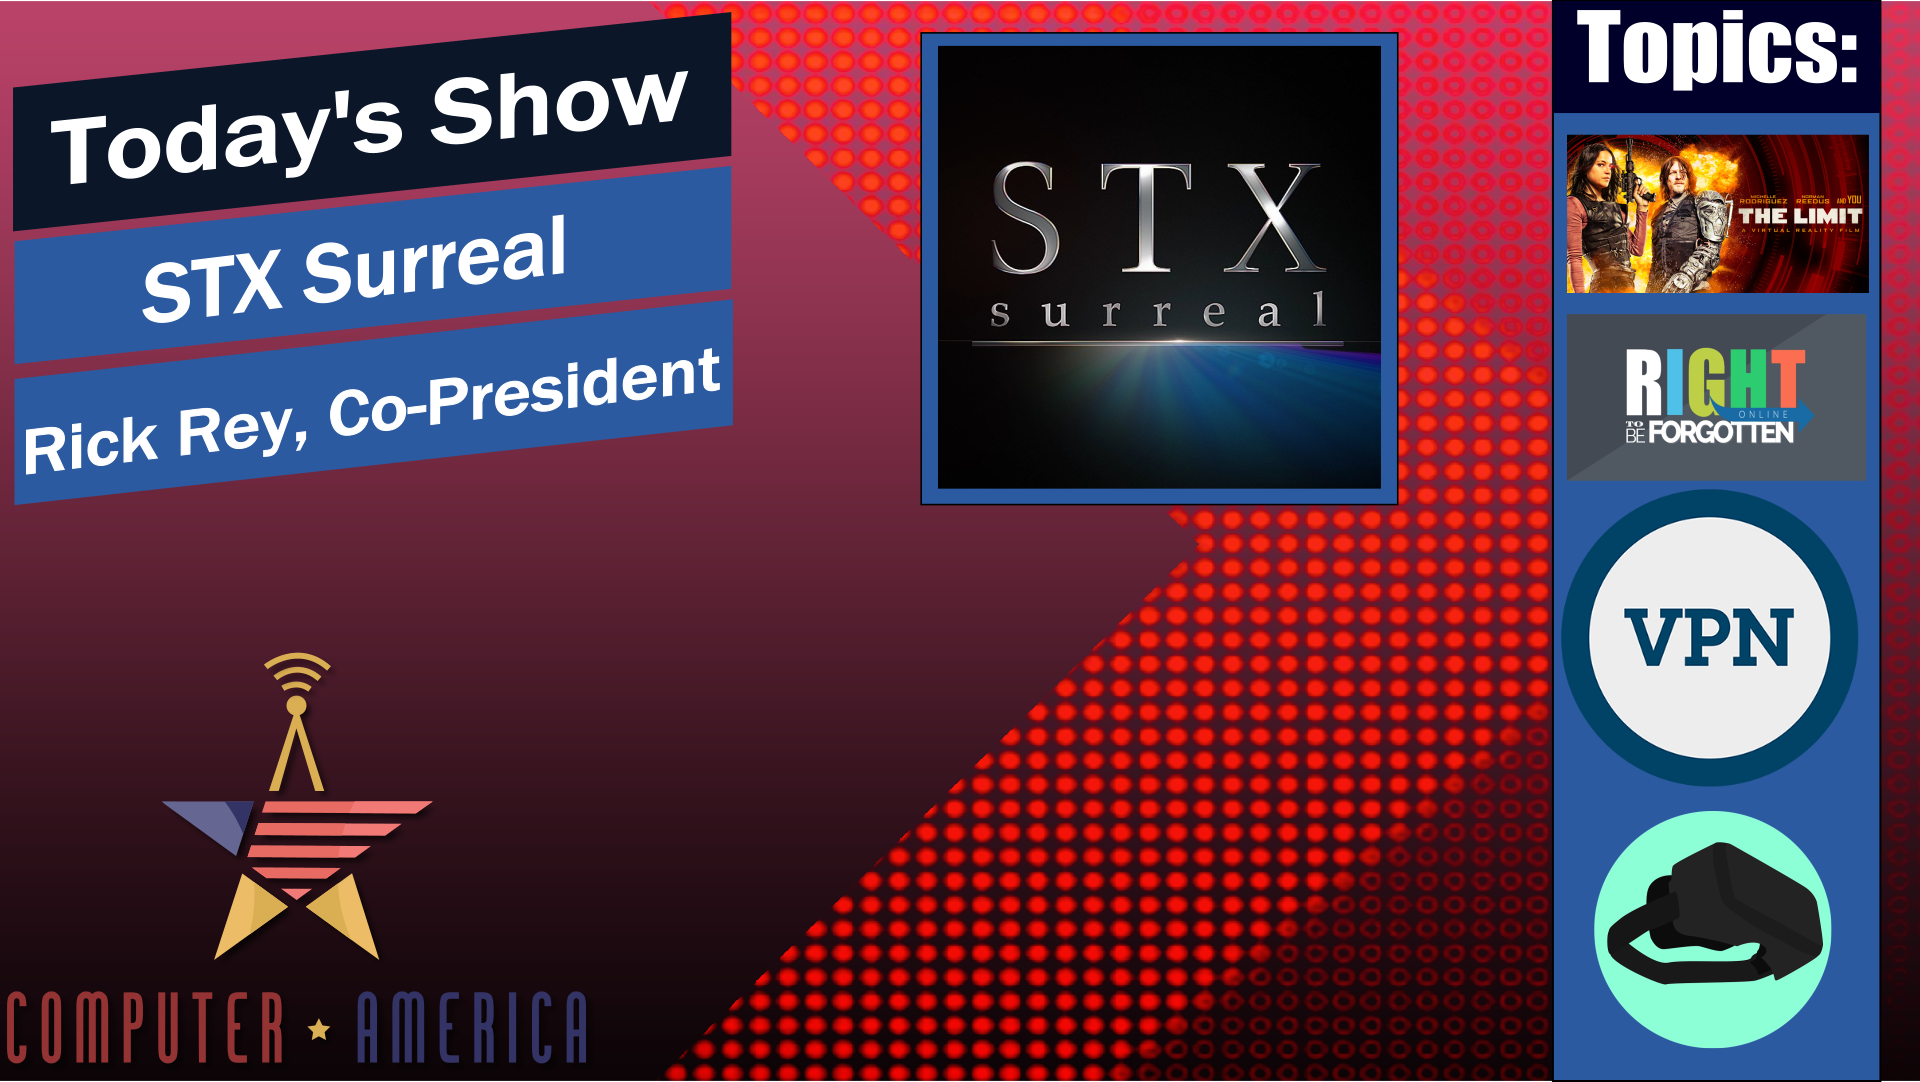 STX Surreal, The Limit: A Virtual Reality Film Interview, Free VPN Warning, Right To Be Forgotten